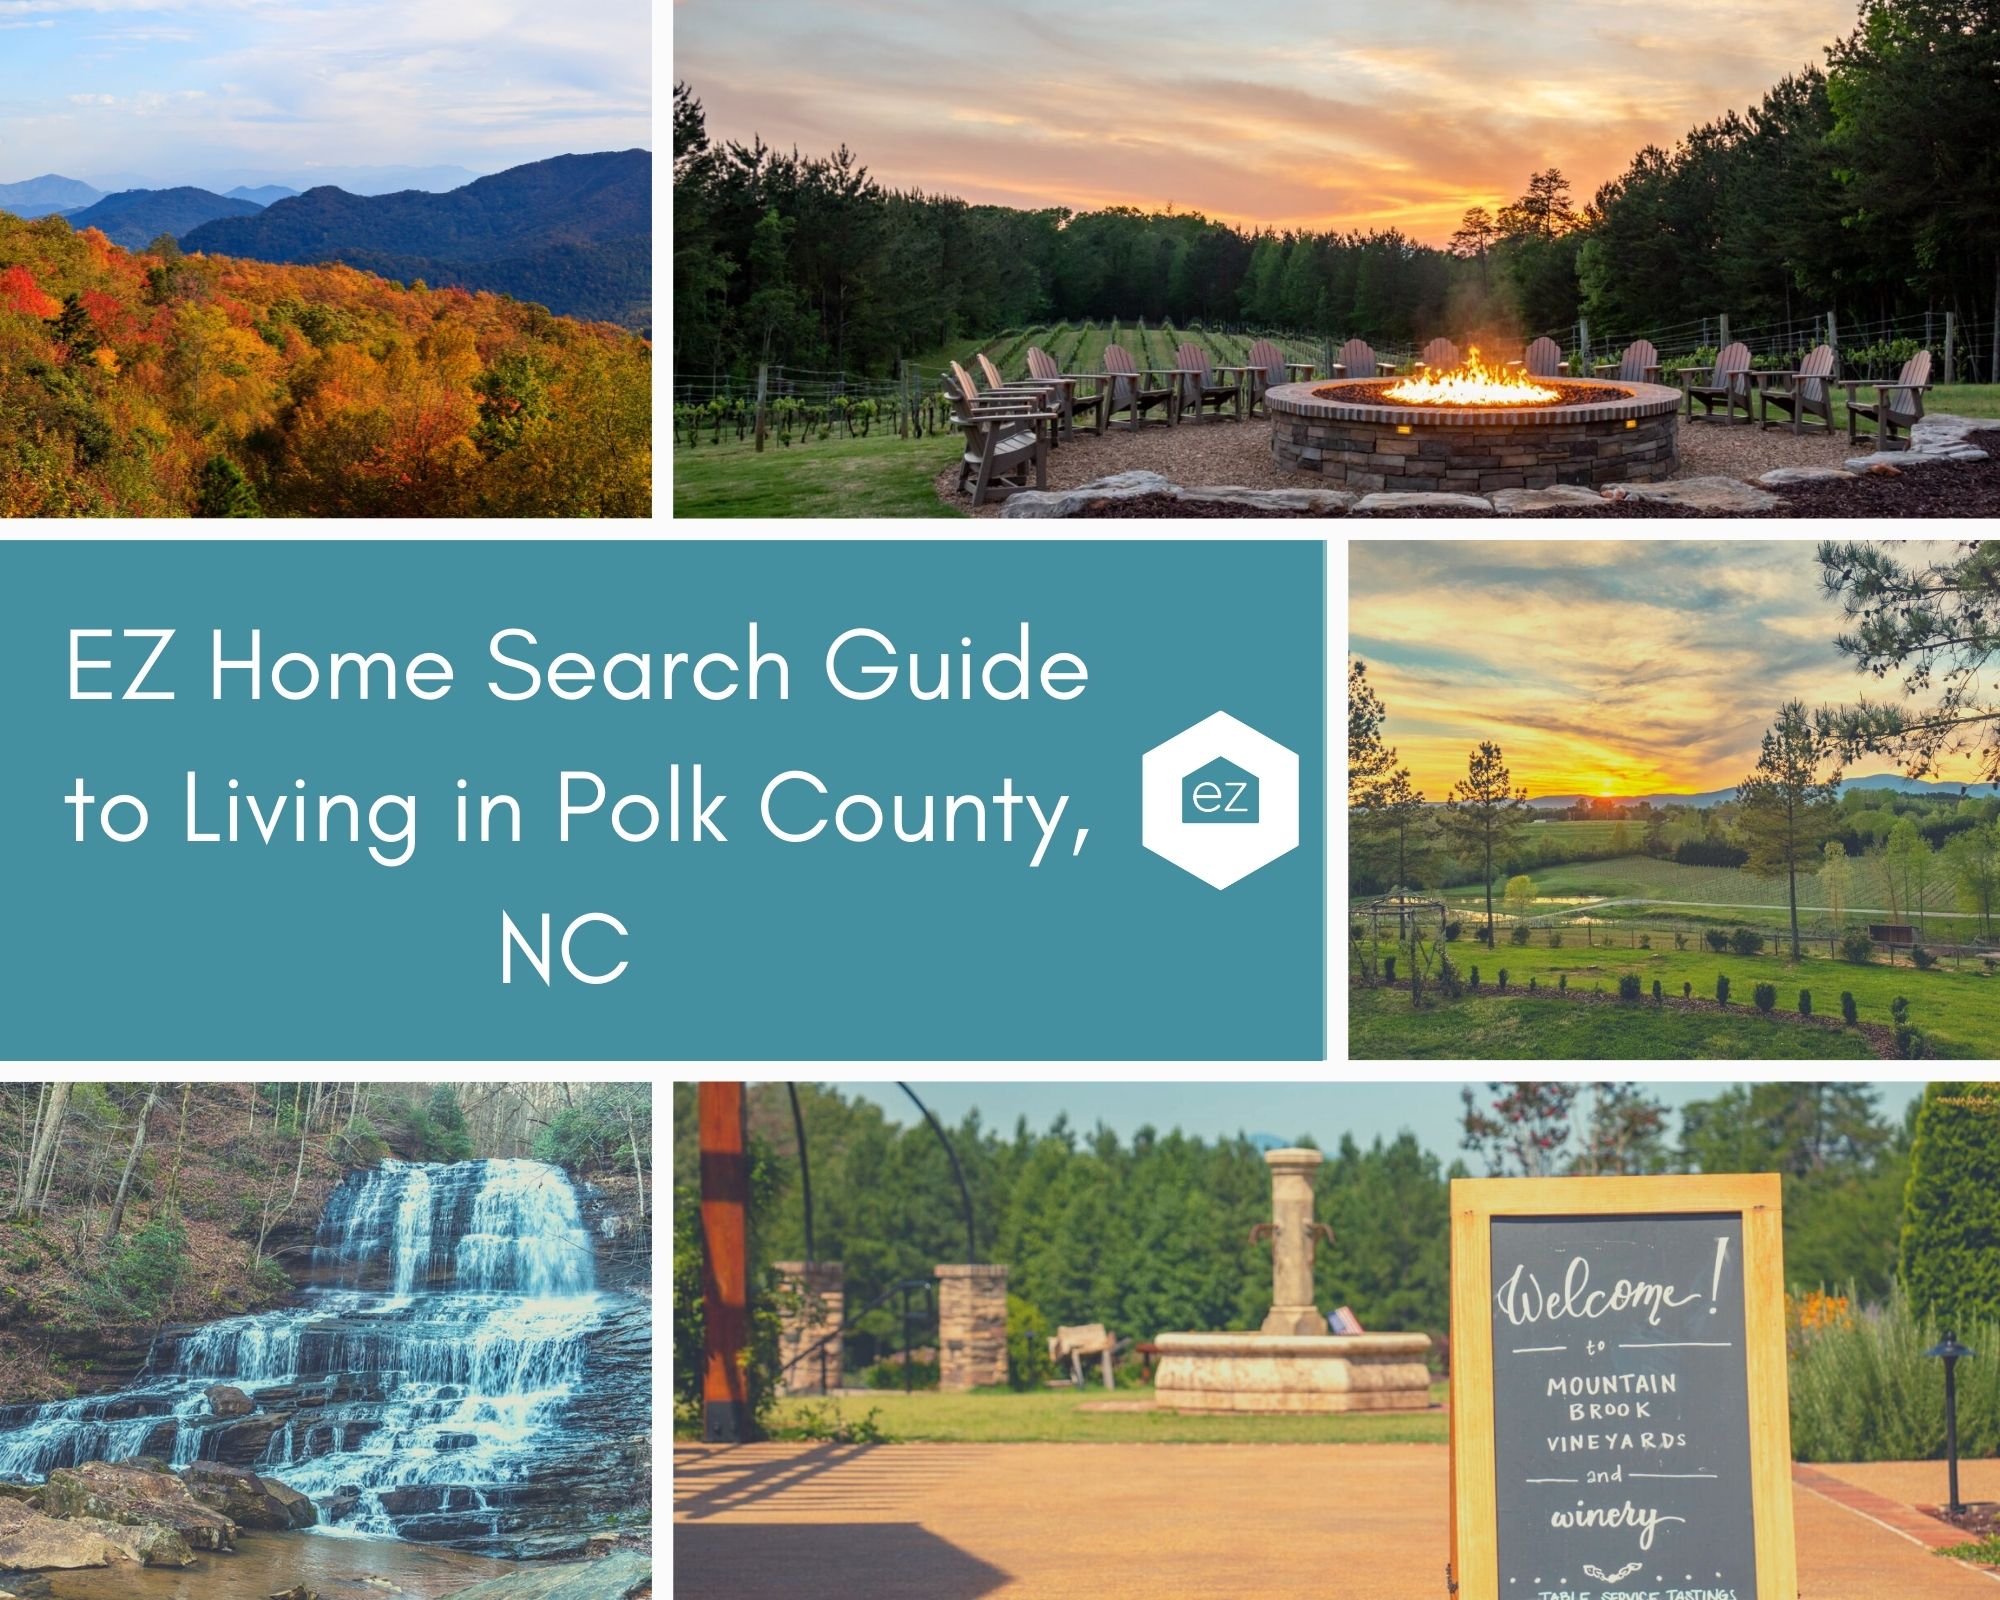 Photos taken from Polk County, NC of mountains, waterfall, and vineyards